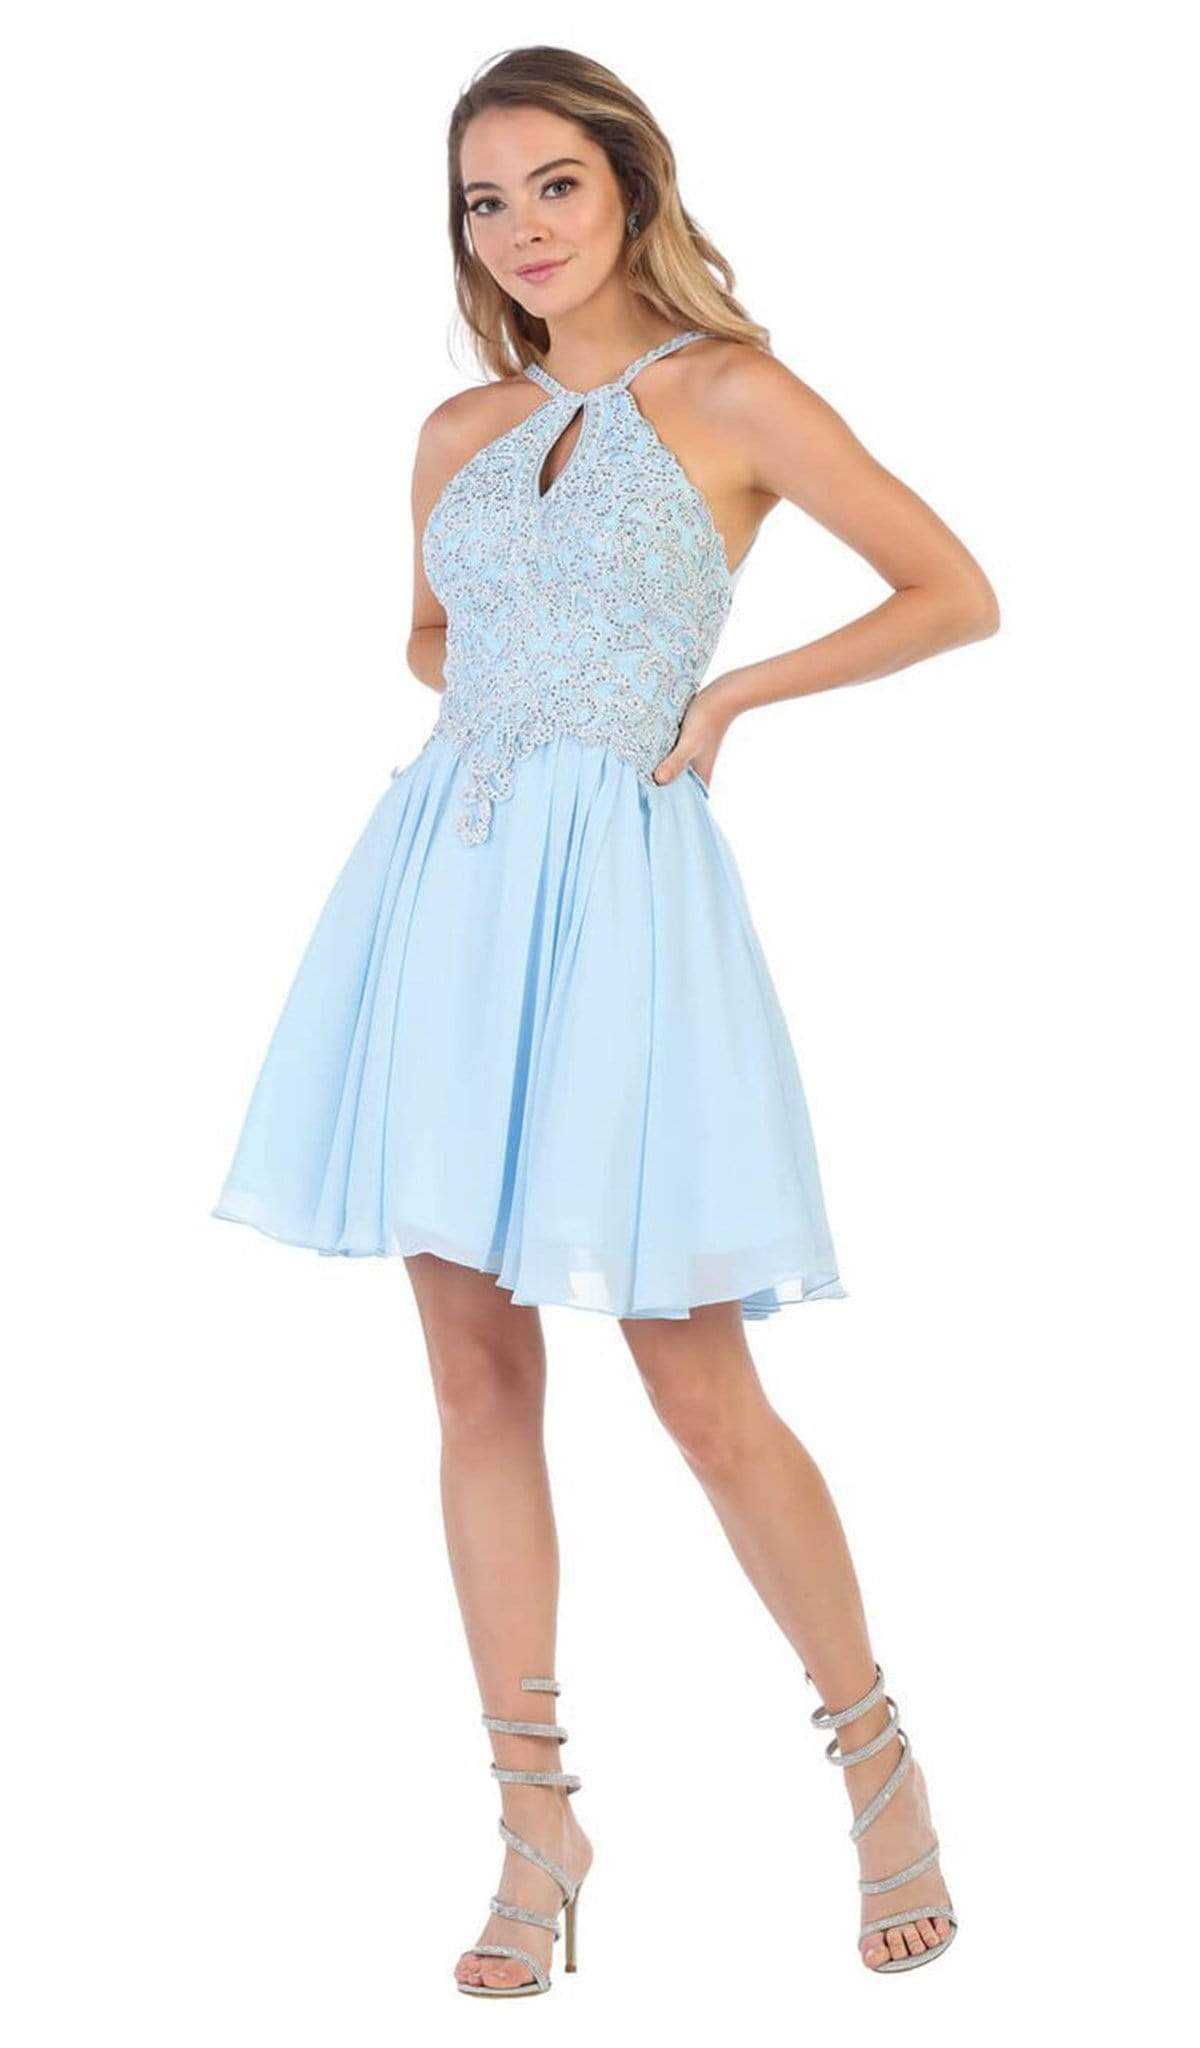 May Queen, May Queen - MQ1614 Front Keyhole Halter Fit and Flare Cocktail Dress